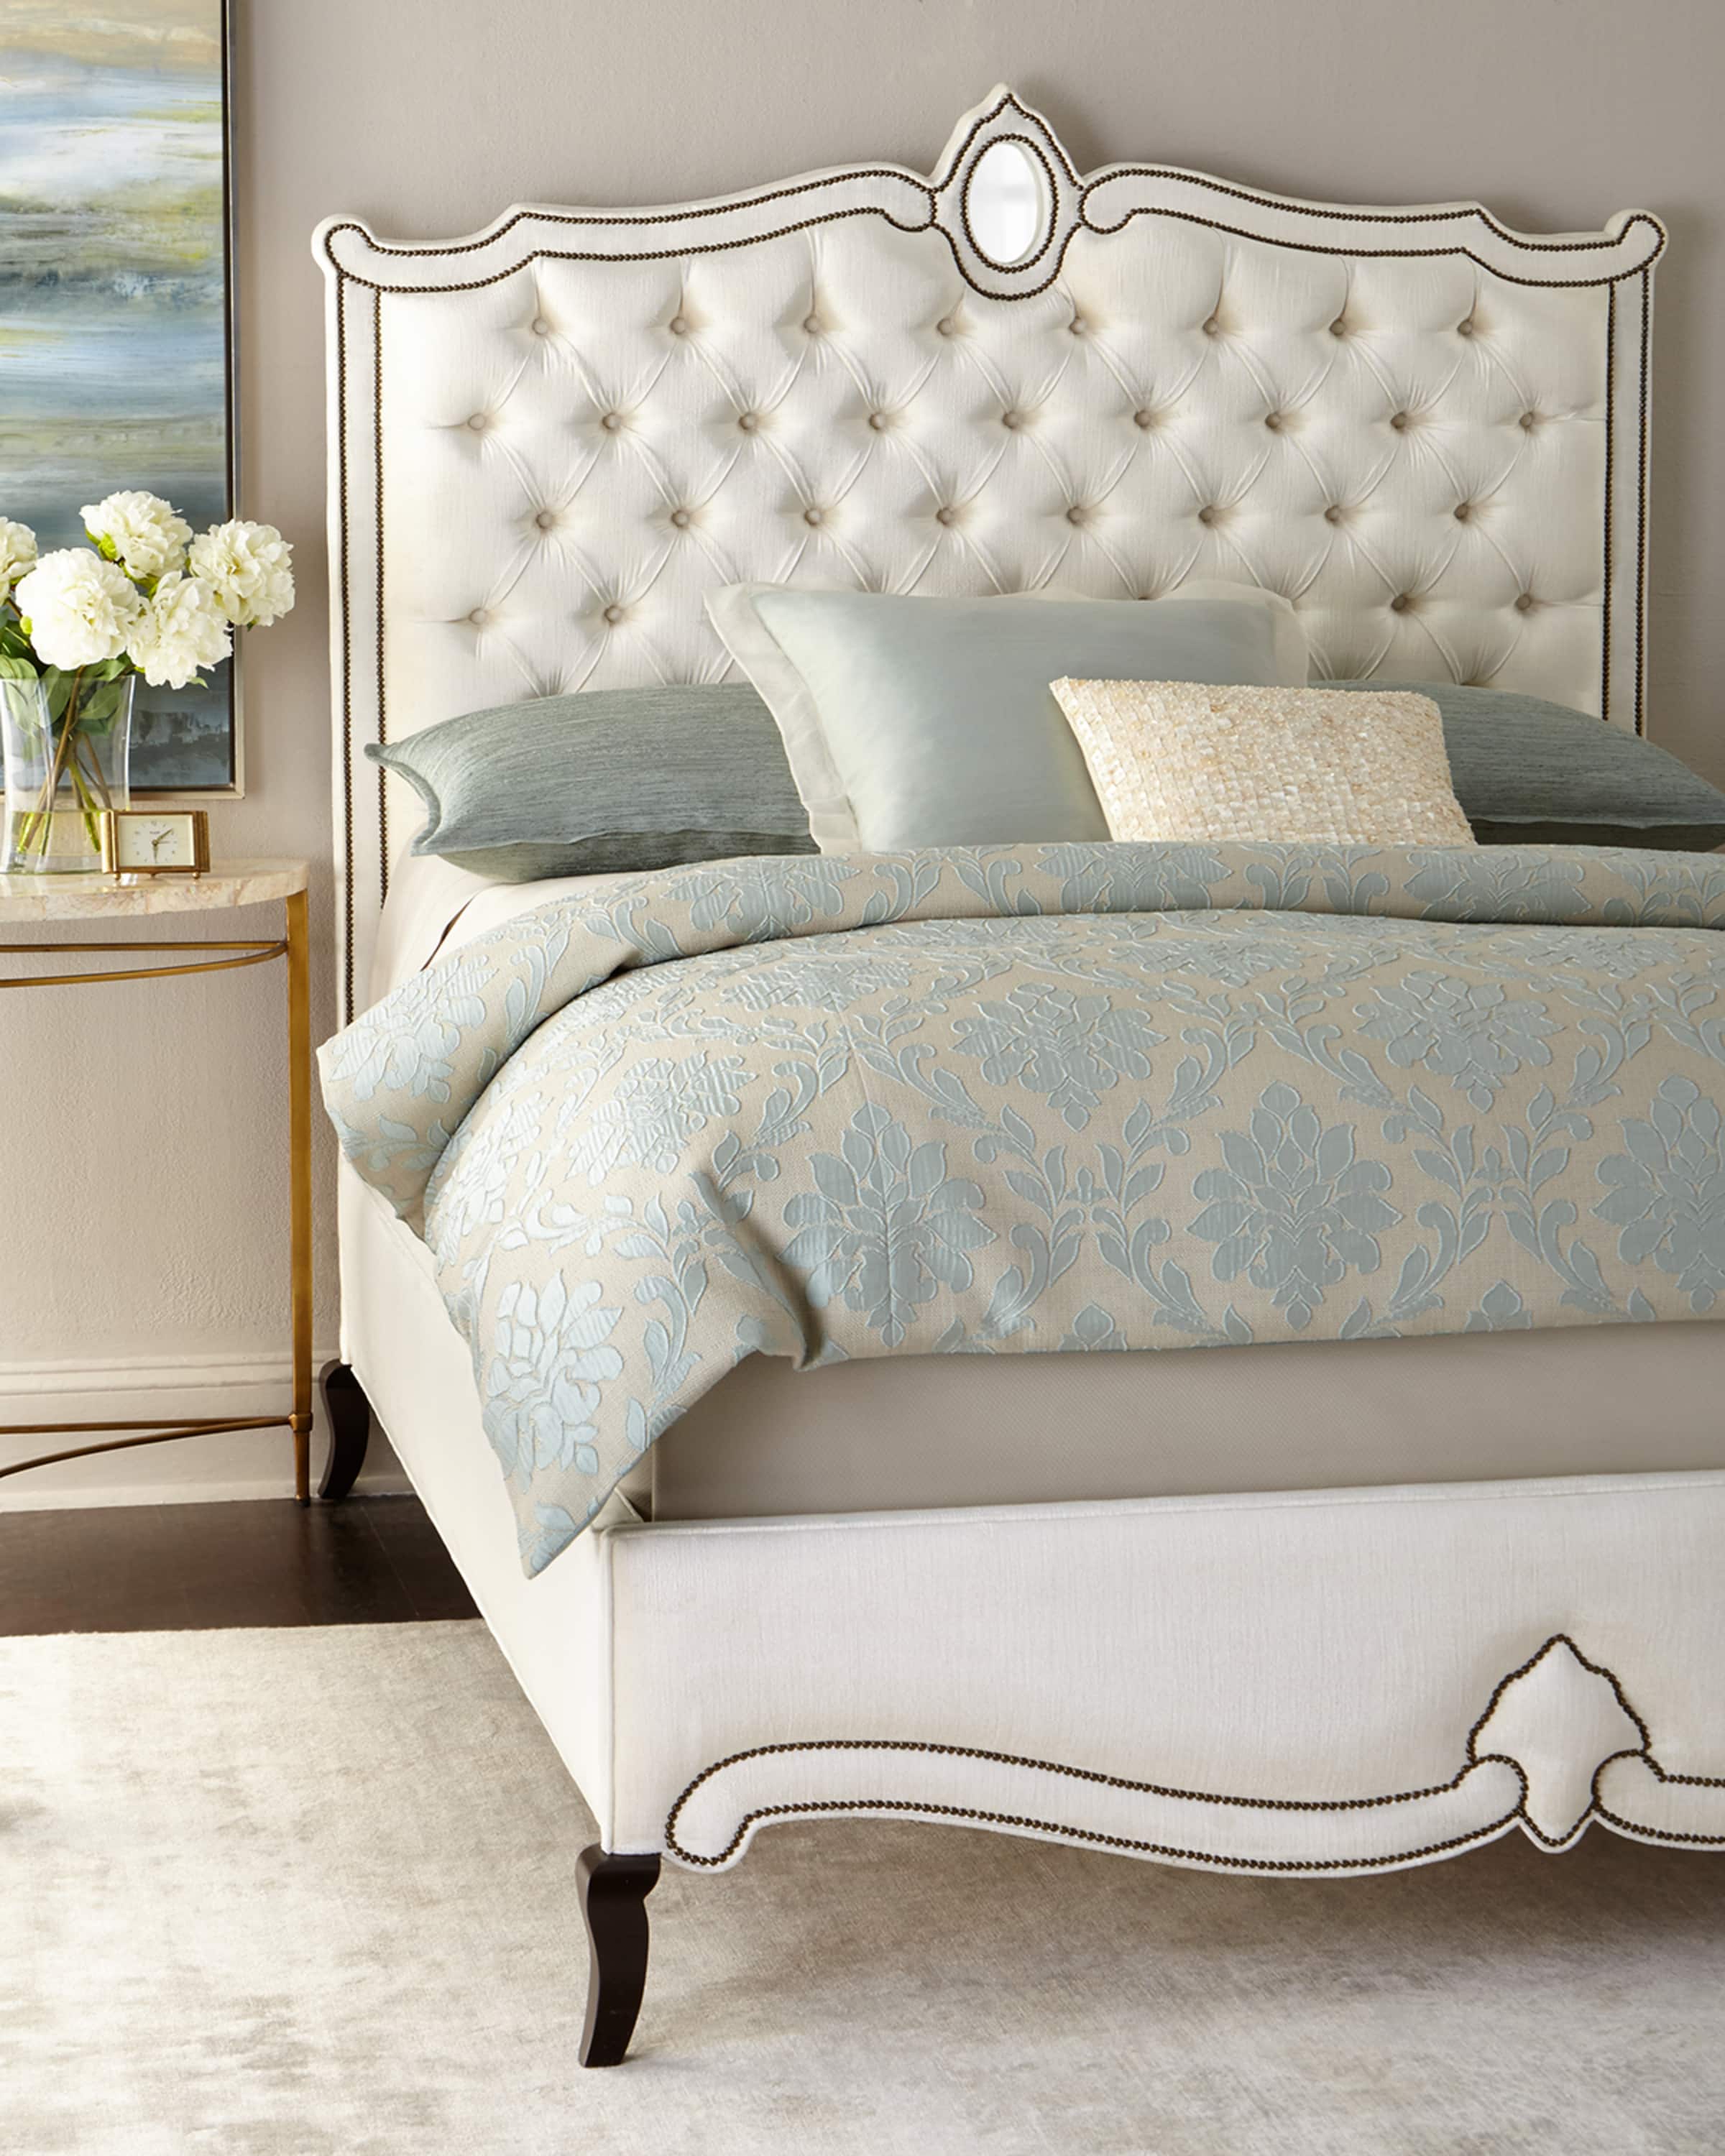 Haute House Christine King Bed